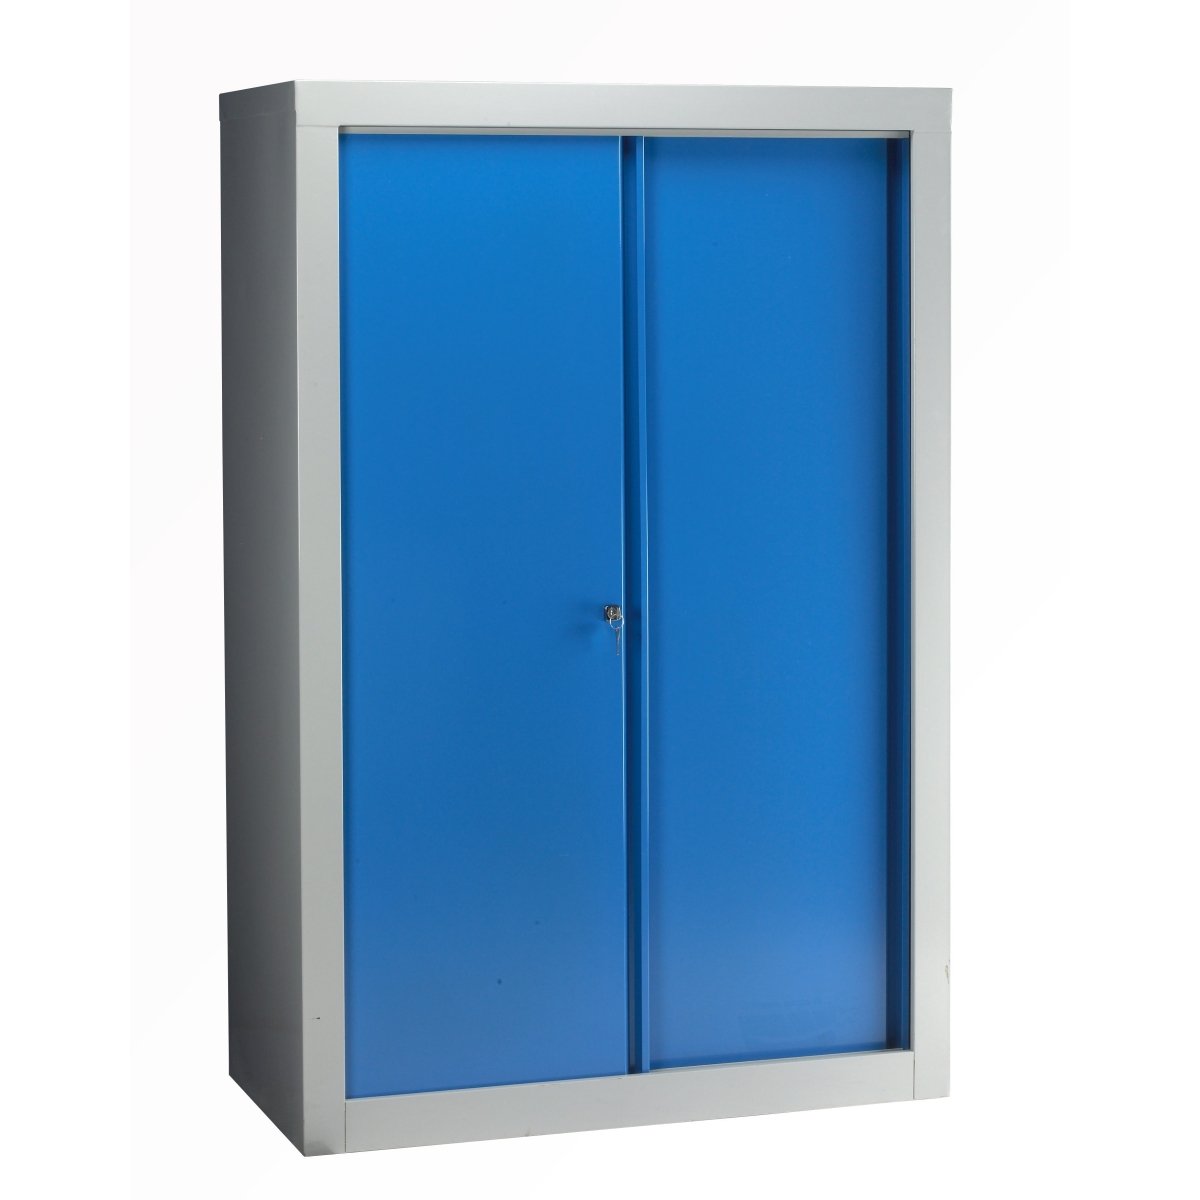 Heavy Duty Tall Sliding Door Cabinet (3 Models) - Warehouse Storage Products